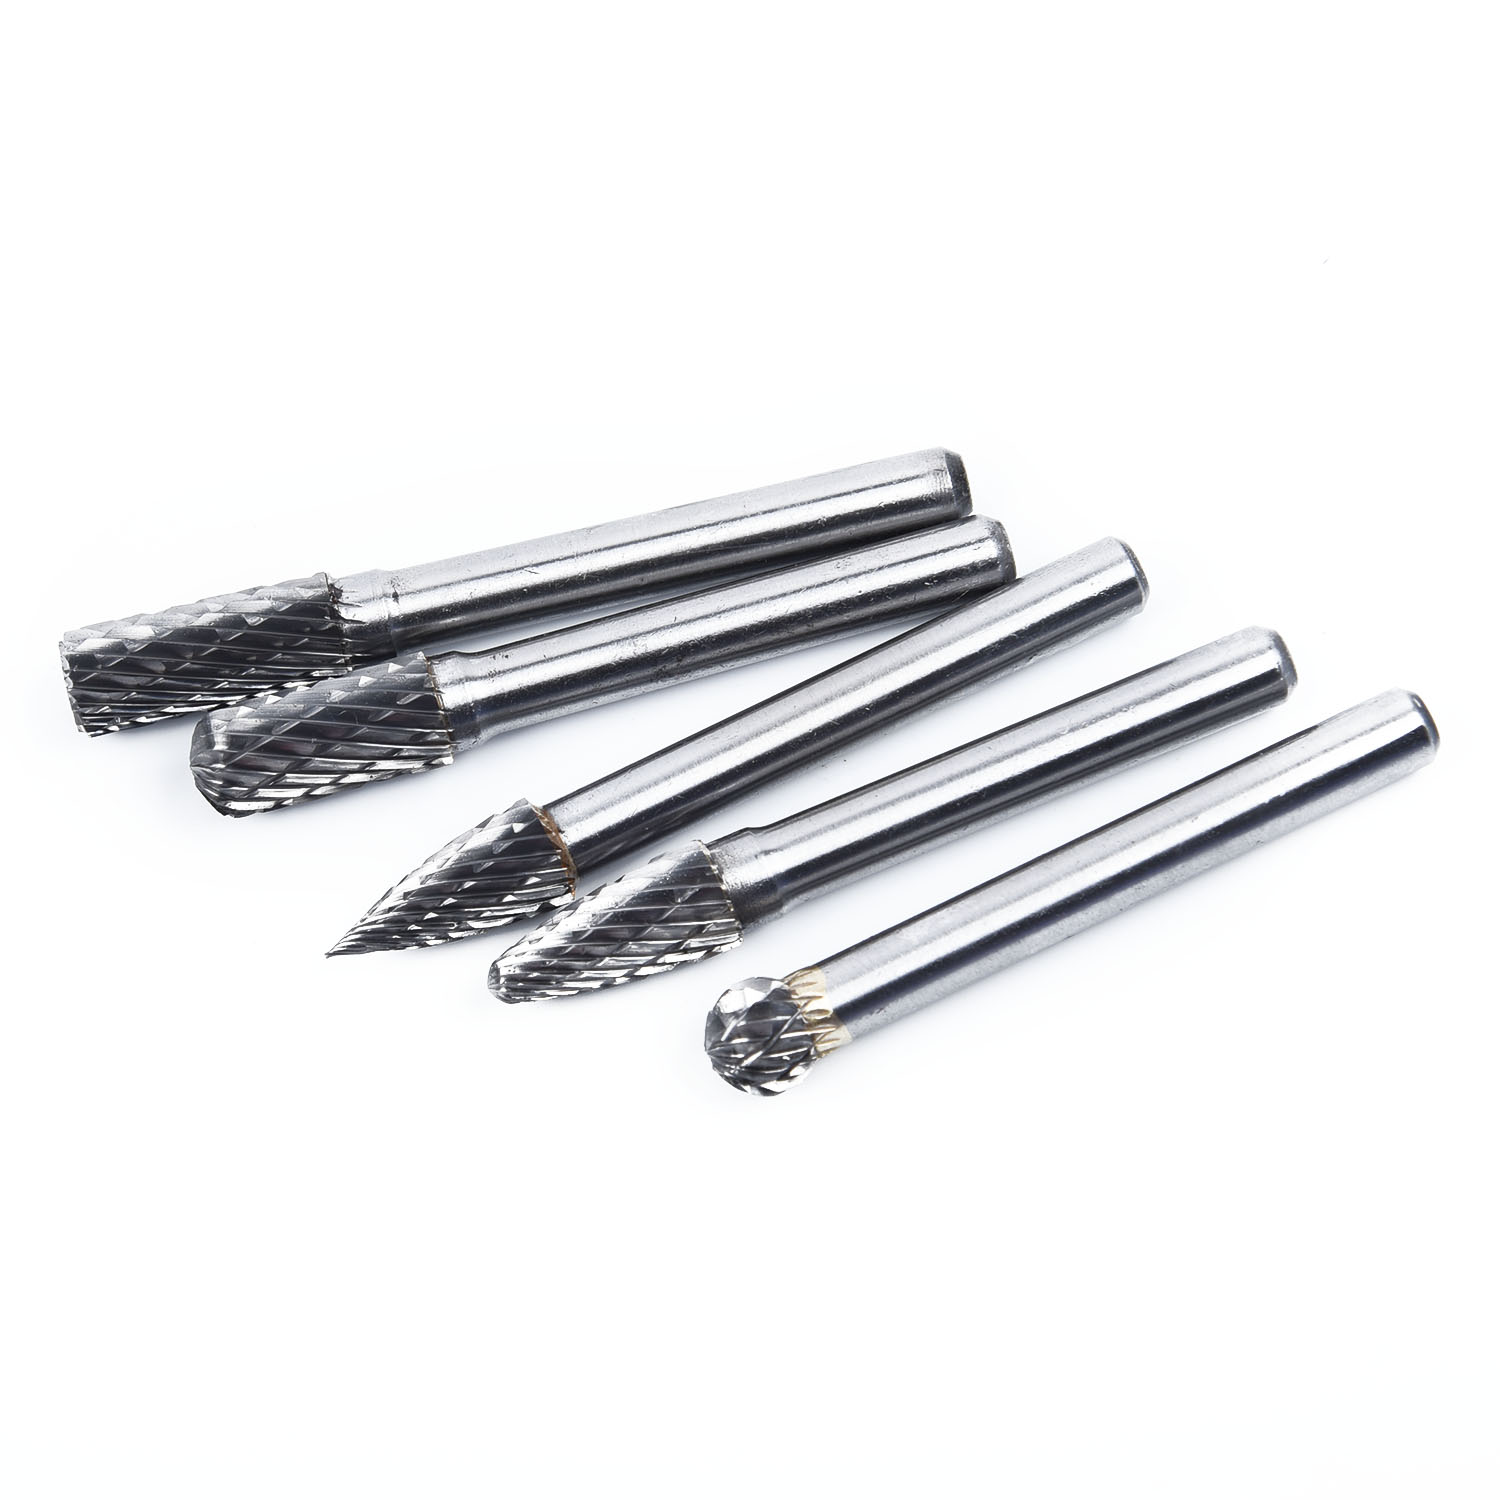 Nikou Carbide Burrs 5Pcs 1/4inch High Speed Steel Hex Shank Burrs Rotary Files Set Tools for Metal Carving,Polishing,Engraving,Drilling 